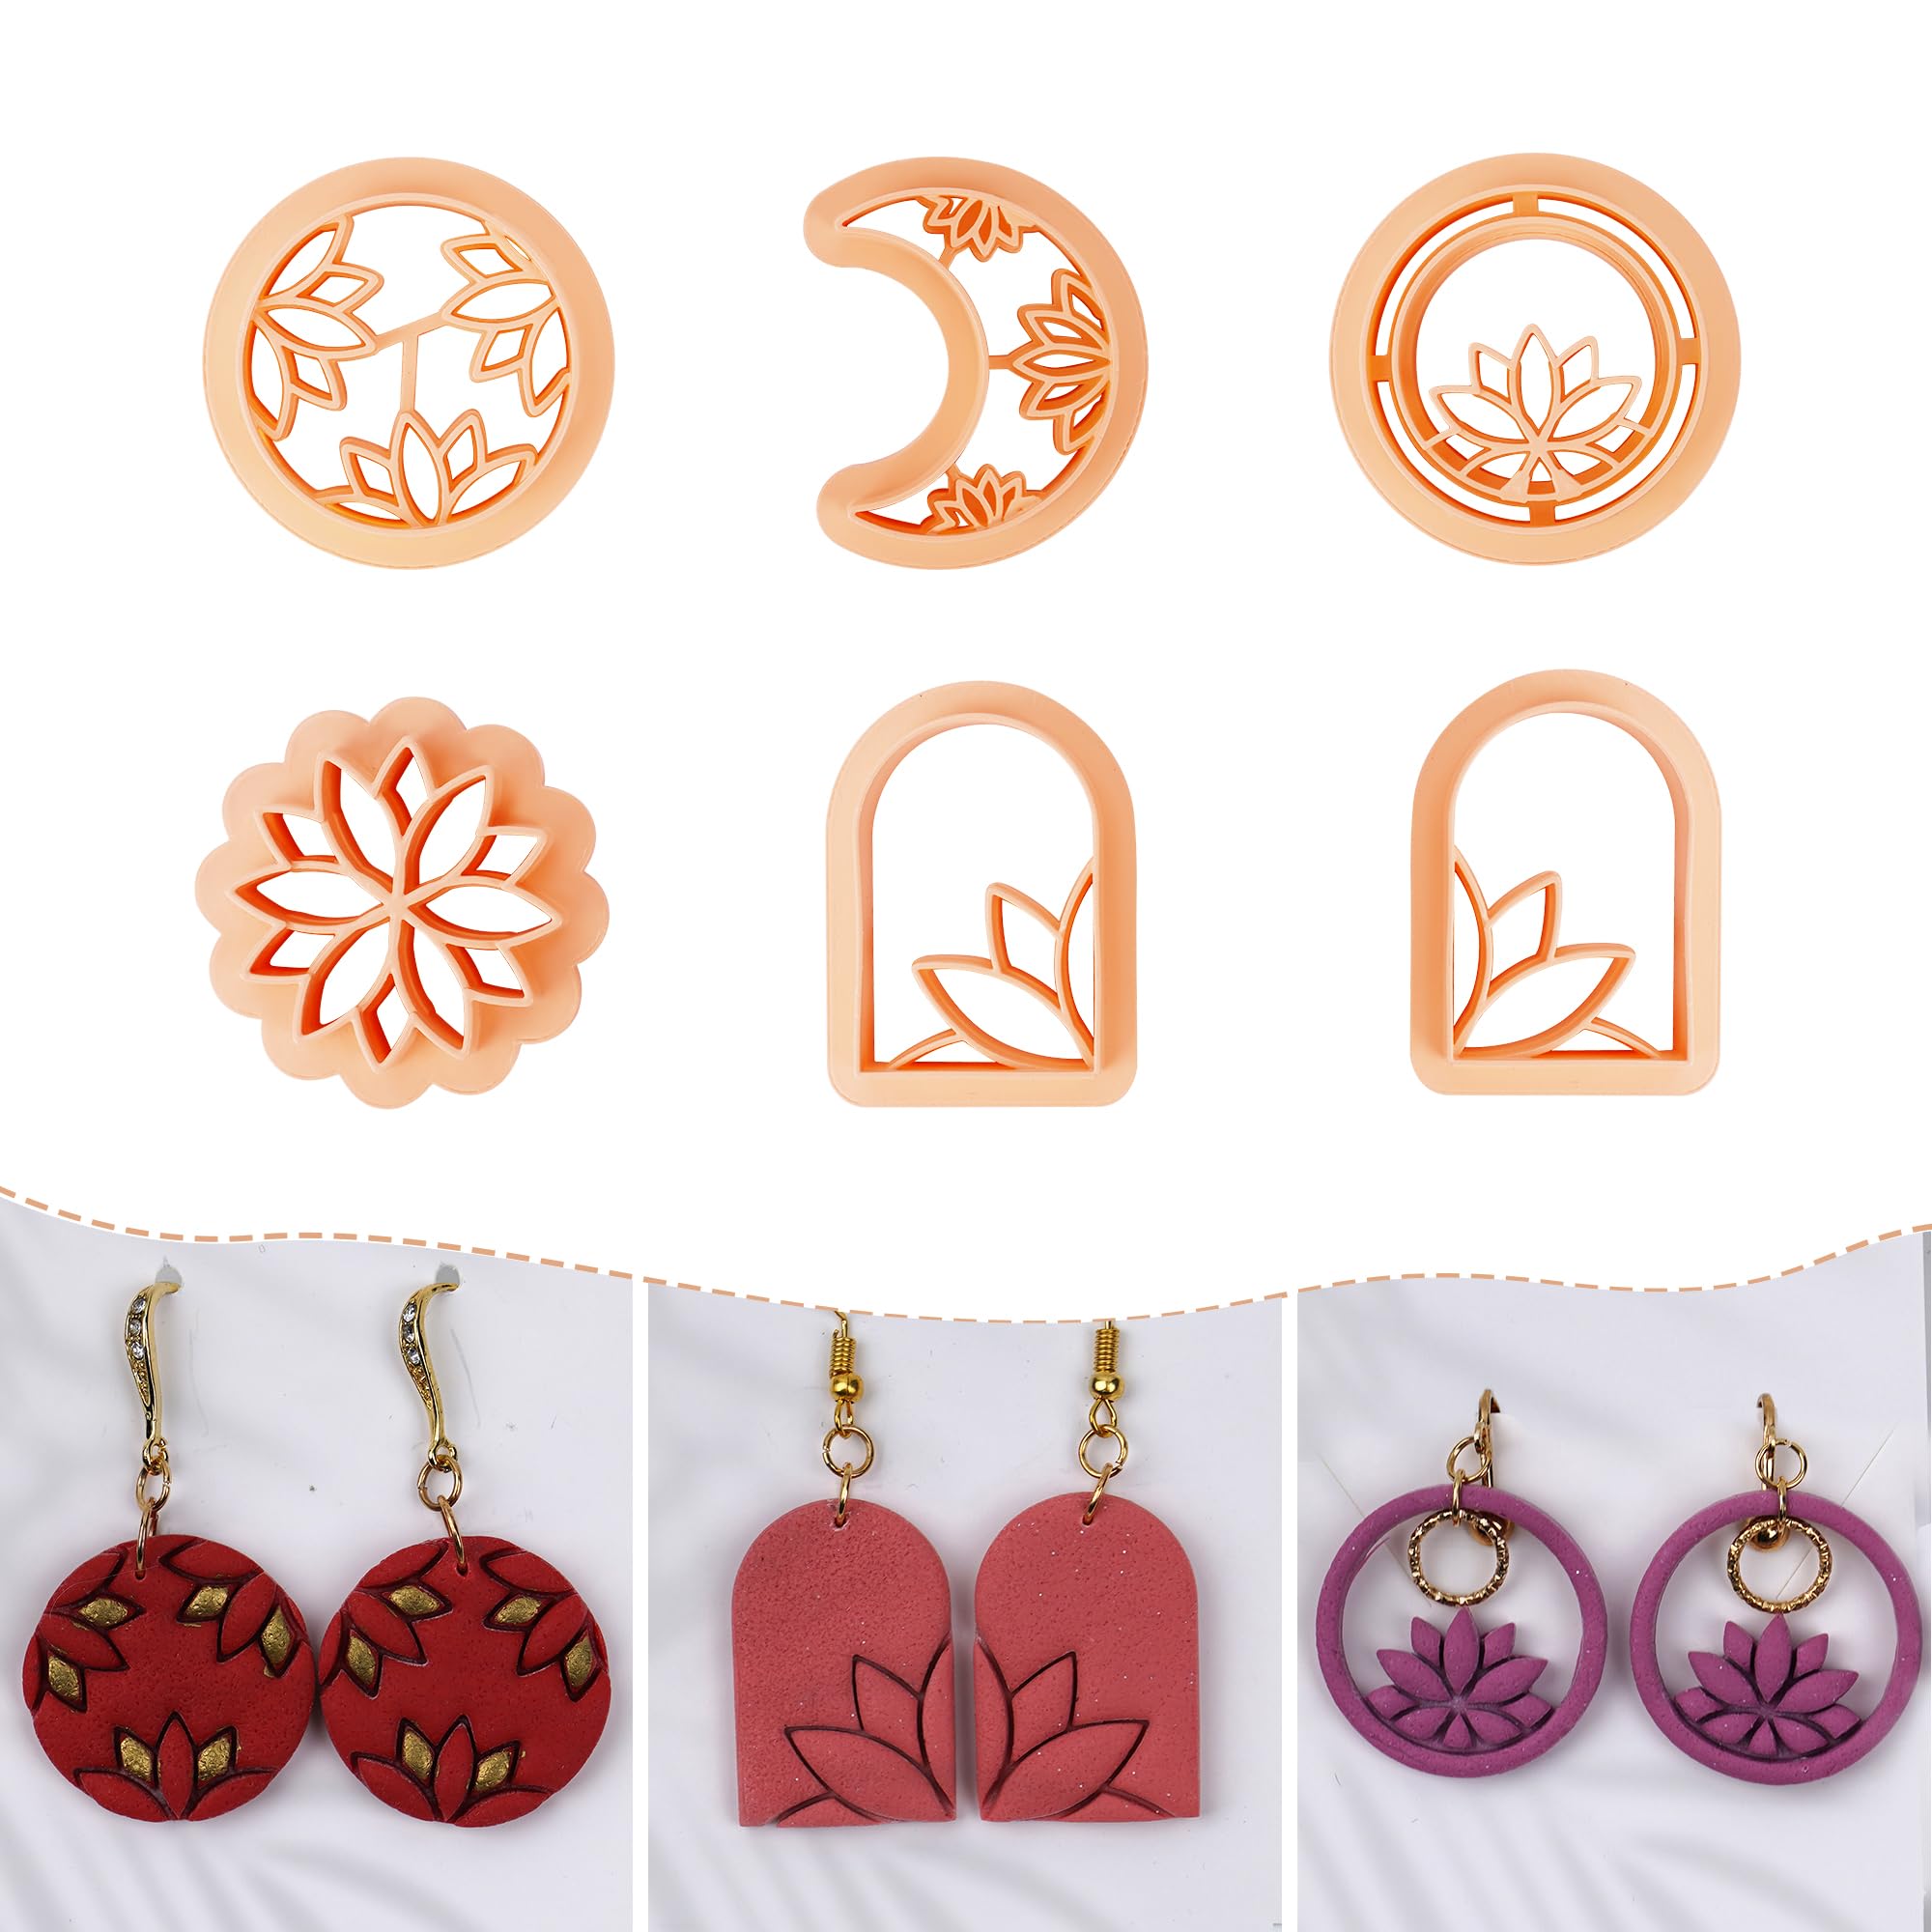 Puocaon Boho Polymer Clay Cutters 6 Pcs Crescent Moon Lotus